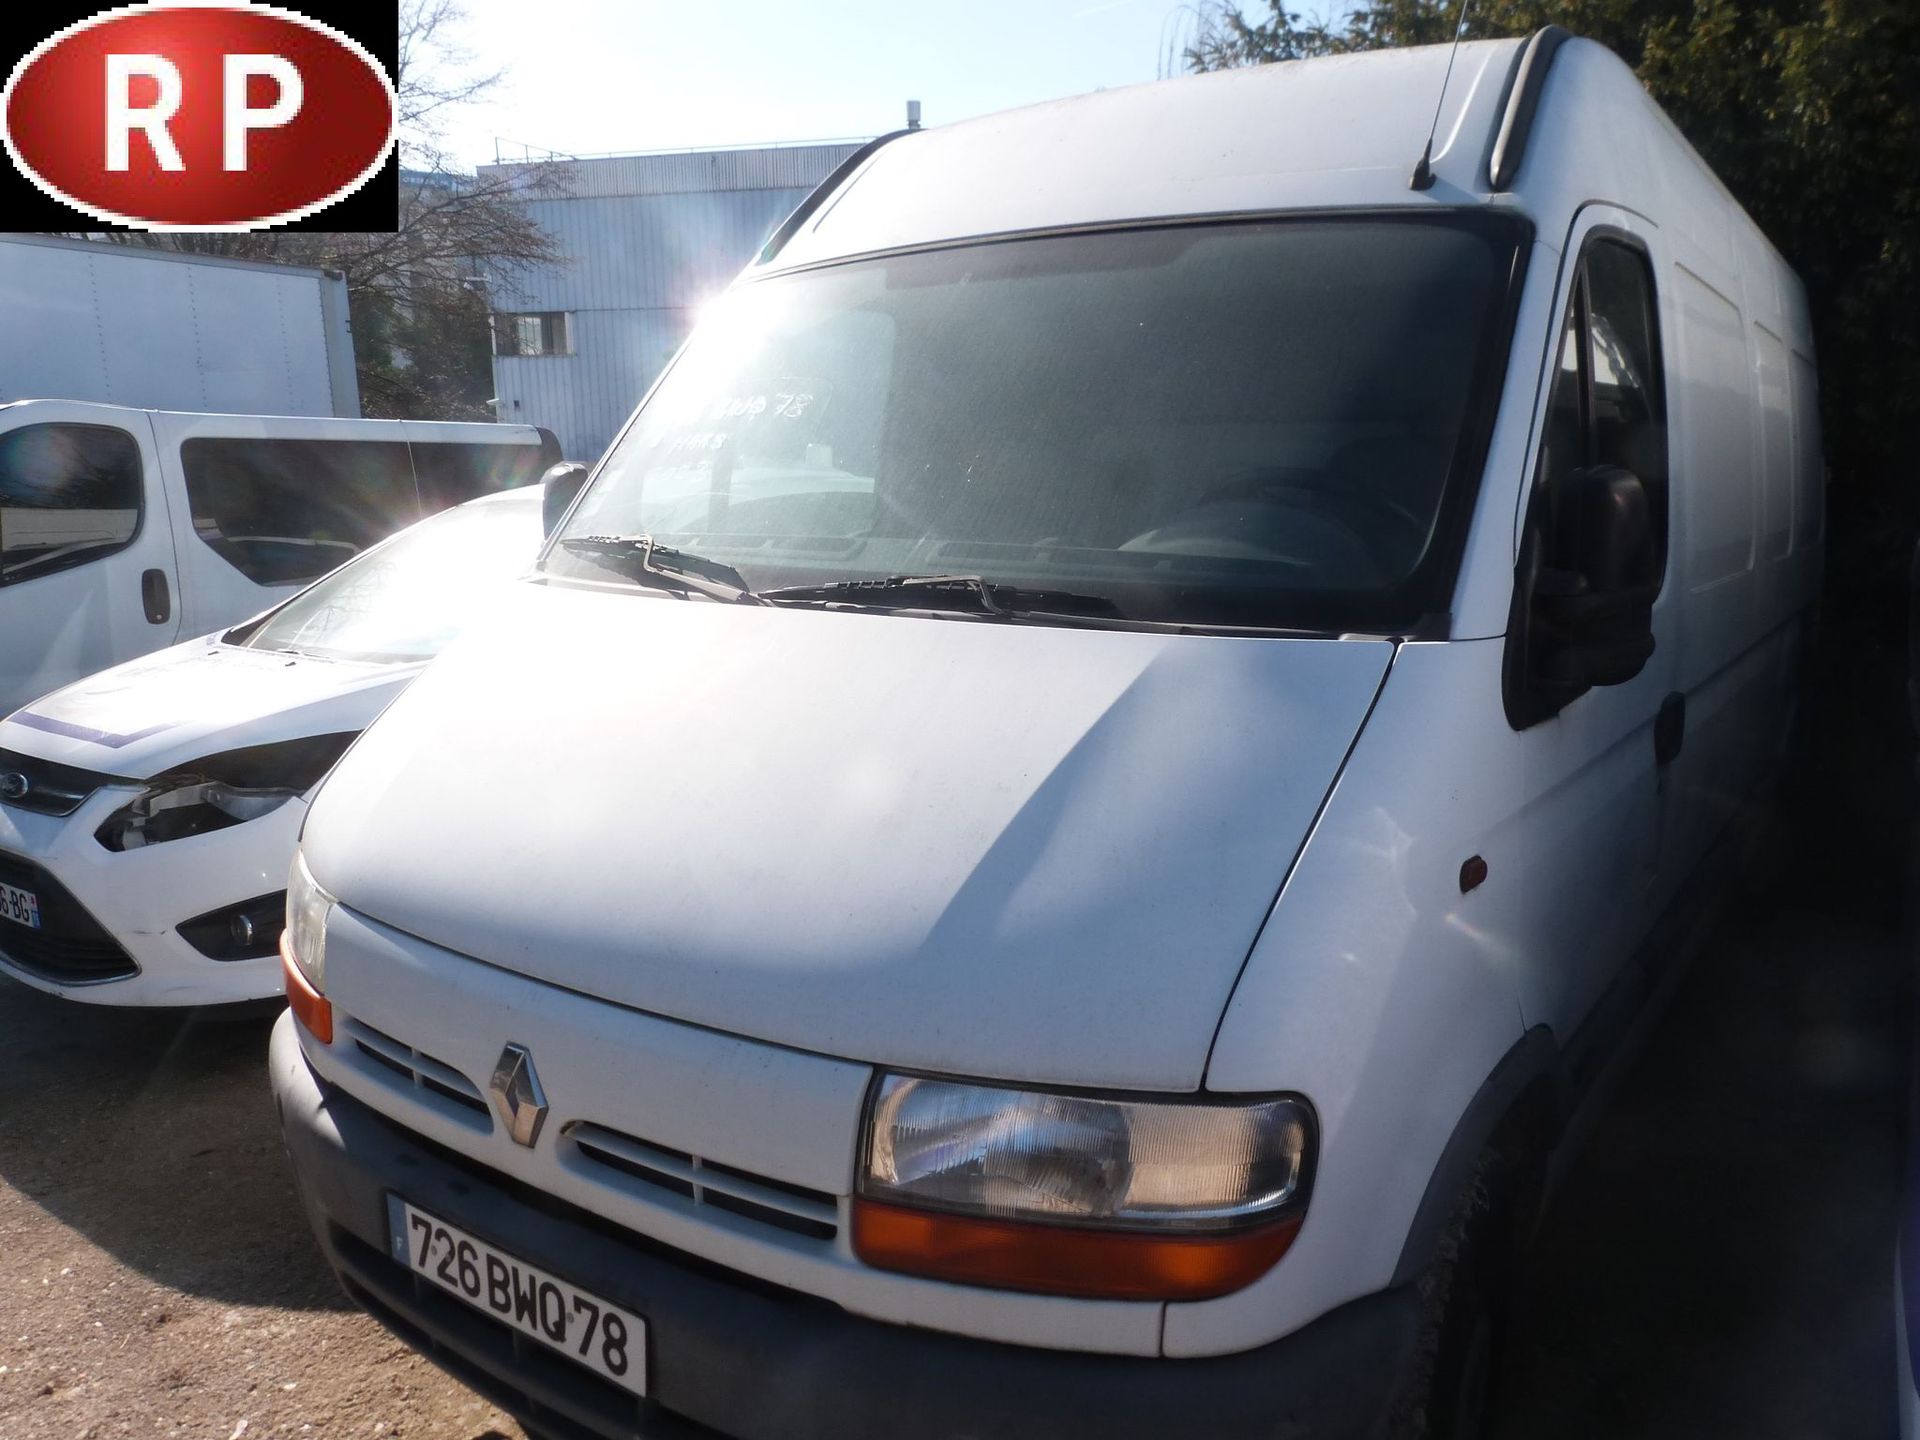 Null [RP] RENAULT Master 2.8 dTi 116, Gazole, imm. 726 BWQ 78, type FDCCL5, n° d&hellip;